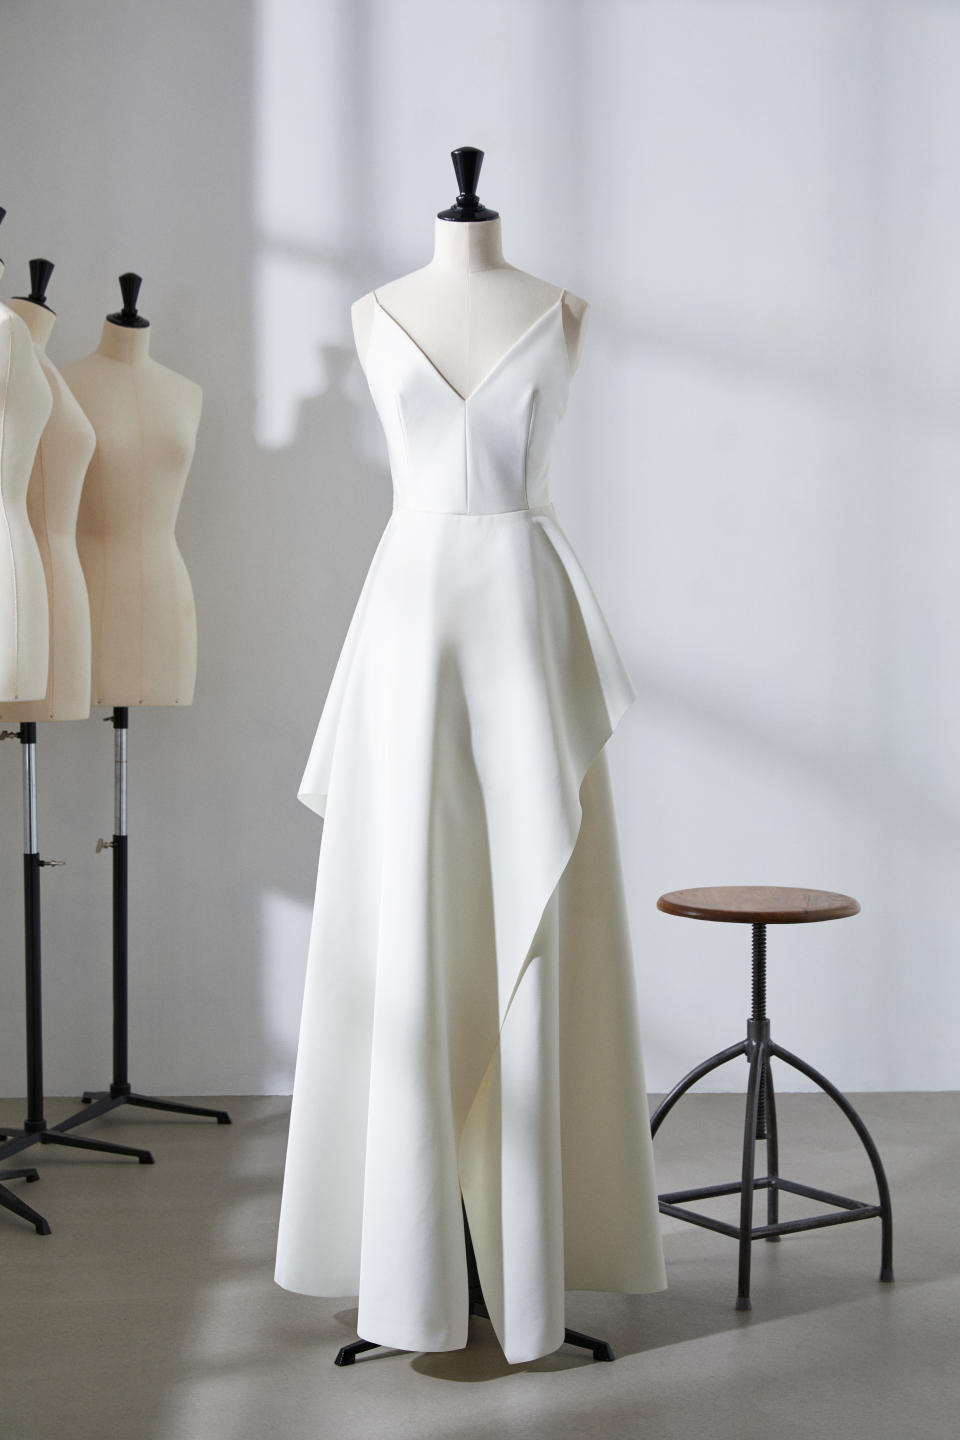 A first look collection showcases two wedding dresses available to rent. [Photo: H&M]